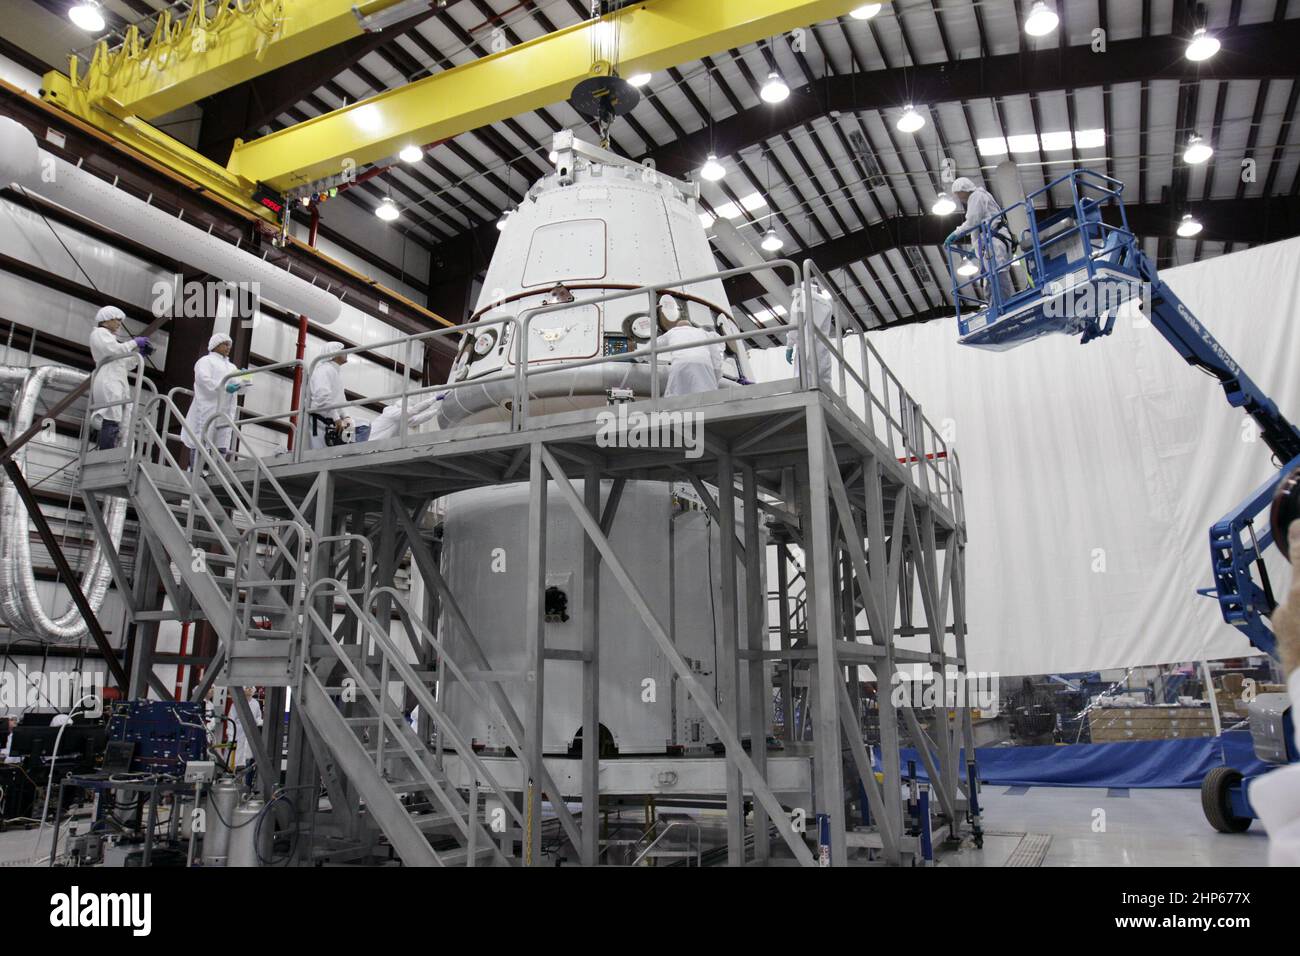 The Space Exploration Technologies Corp. (SpaceX) Dragon capsule is placed atop its cargo ring inside a processing hangar at Cape Canaveral Air Force Station in Florida ca. 2011 Stock Photo